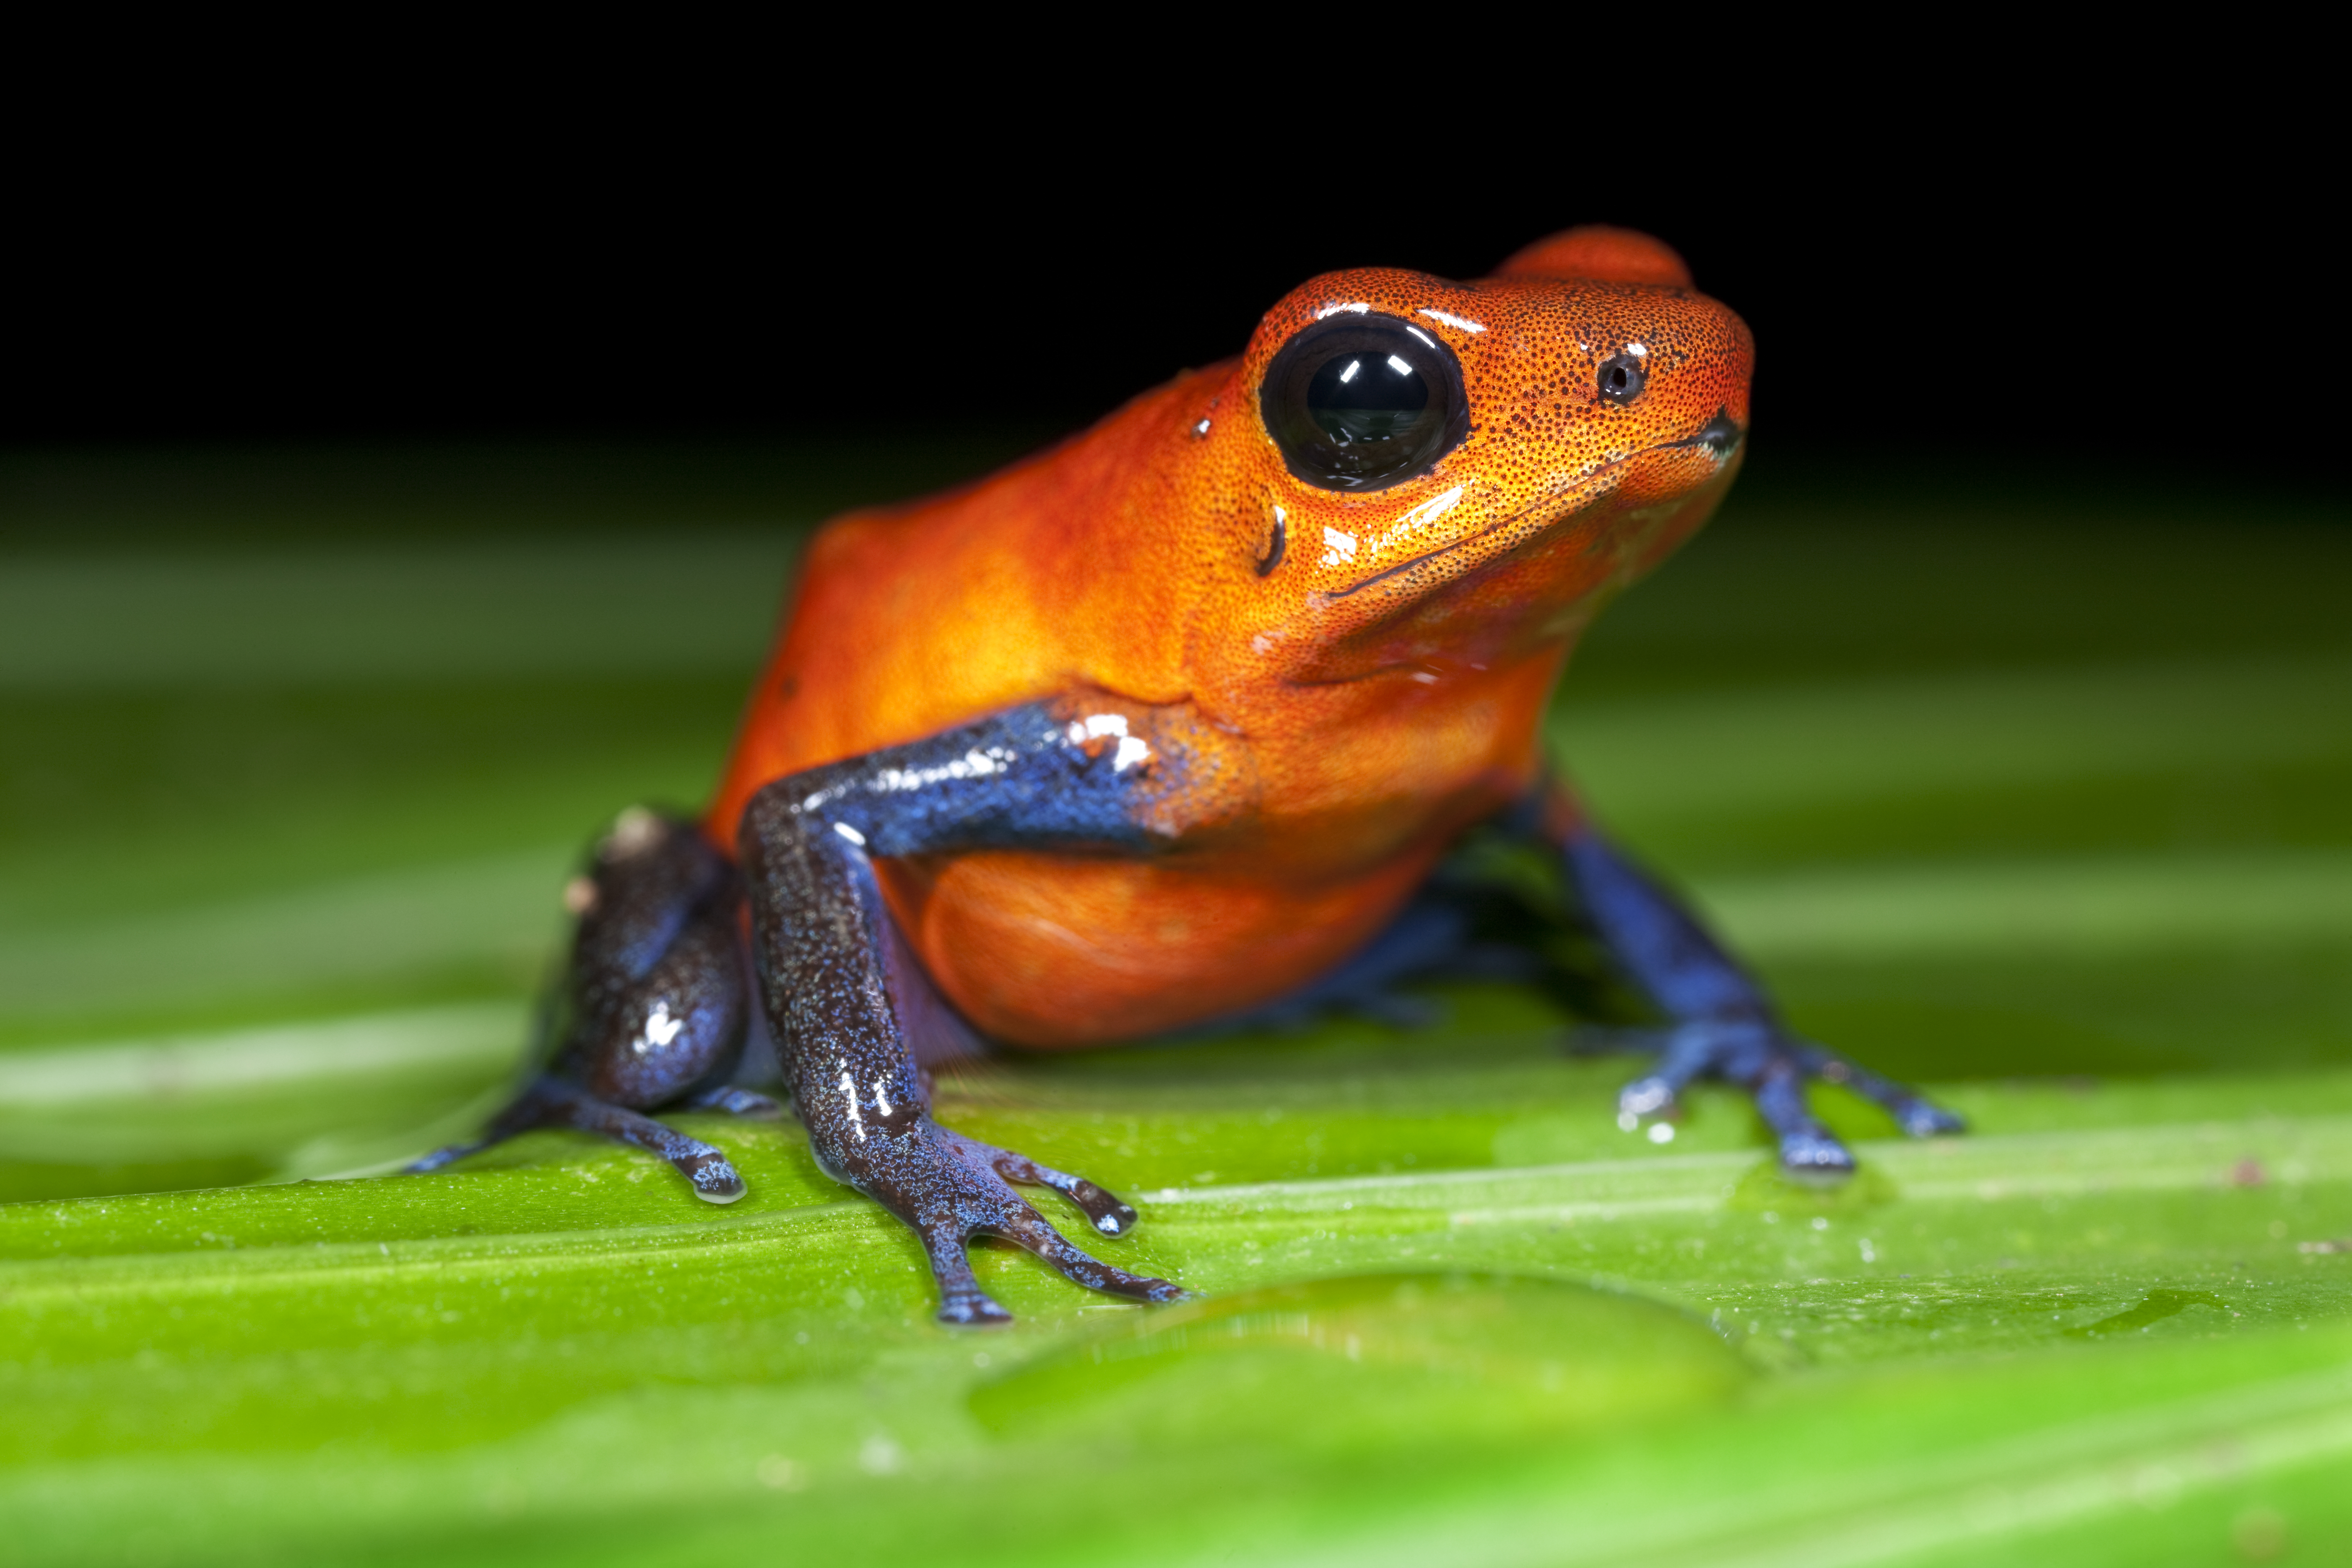 10 most poisonous animals, from frogs to sharks. There may be some